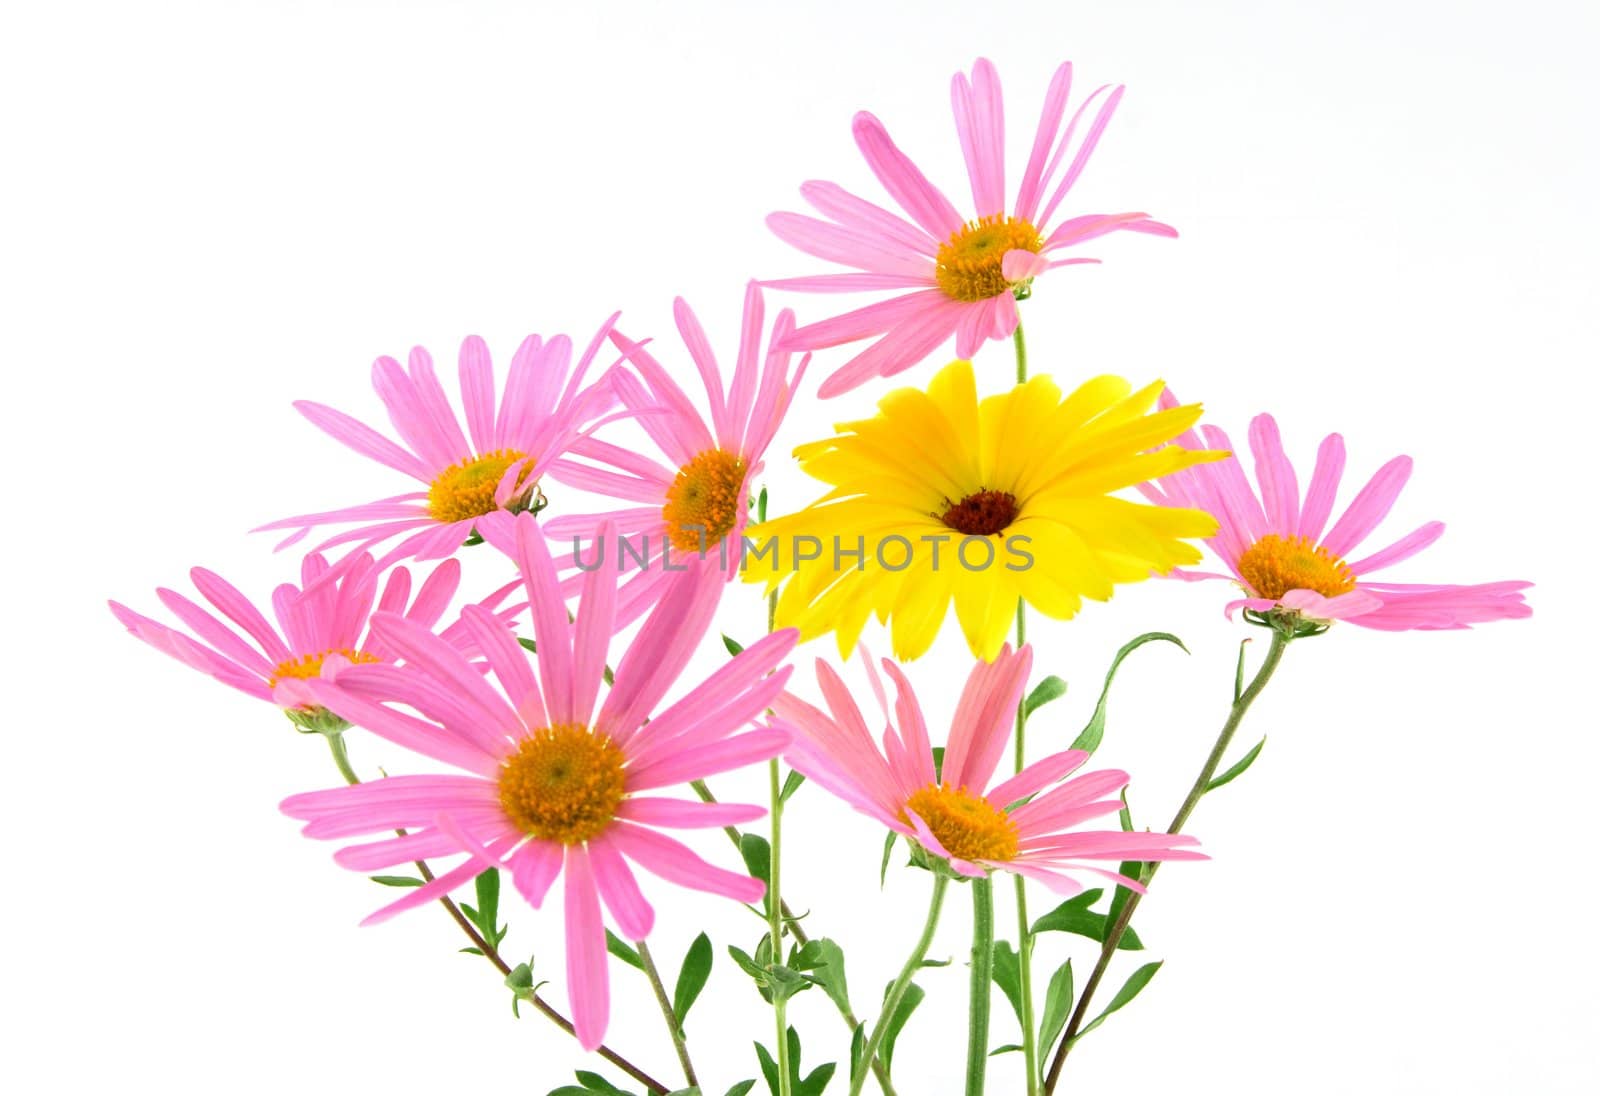 Bouquet of pink and yellow flowers on white background (gerbera daisies).